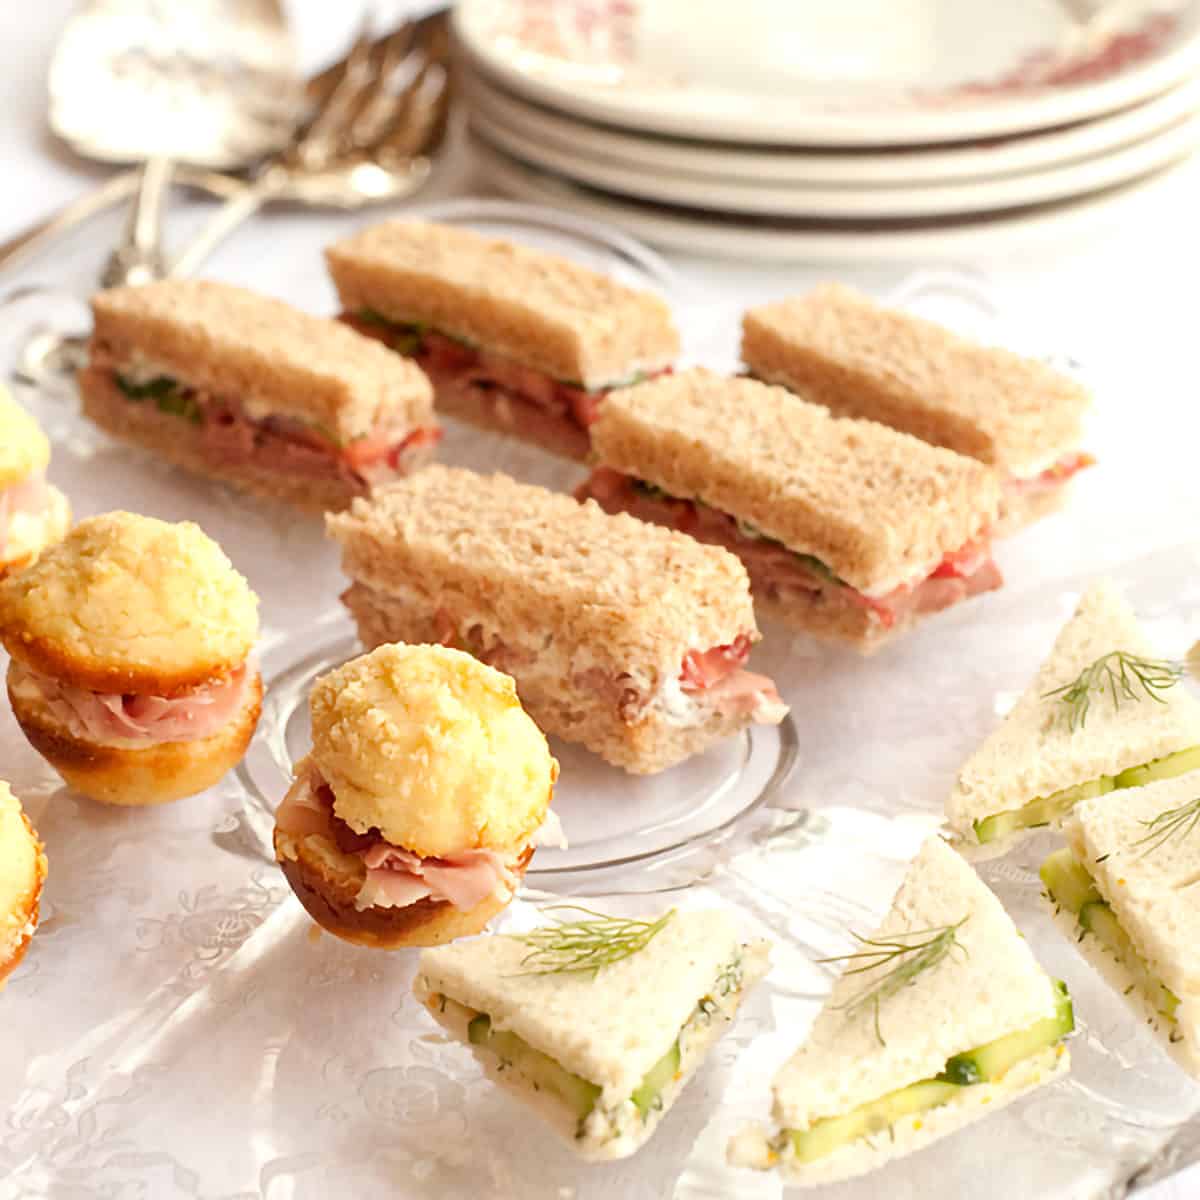 Three types of tea sandwiches on a vintage glass serving tray.